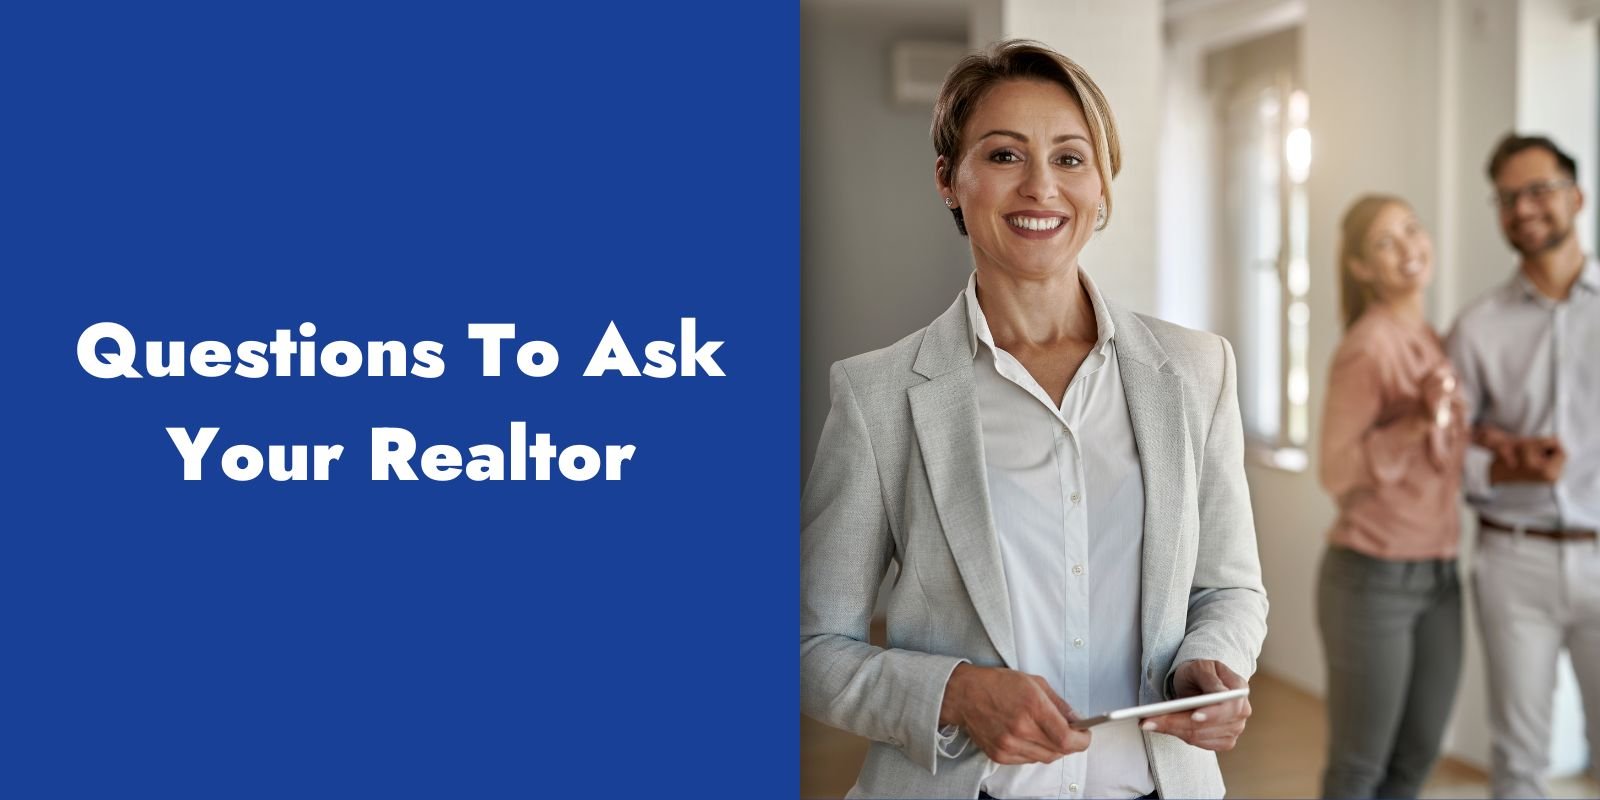 Questions to Ask Your Realtor